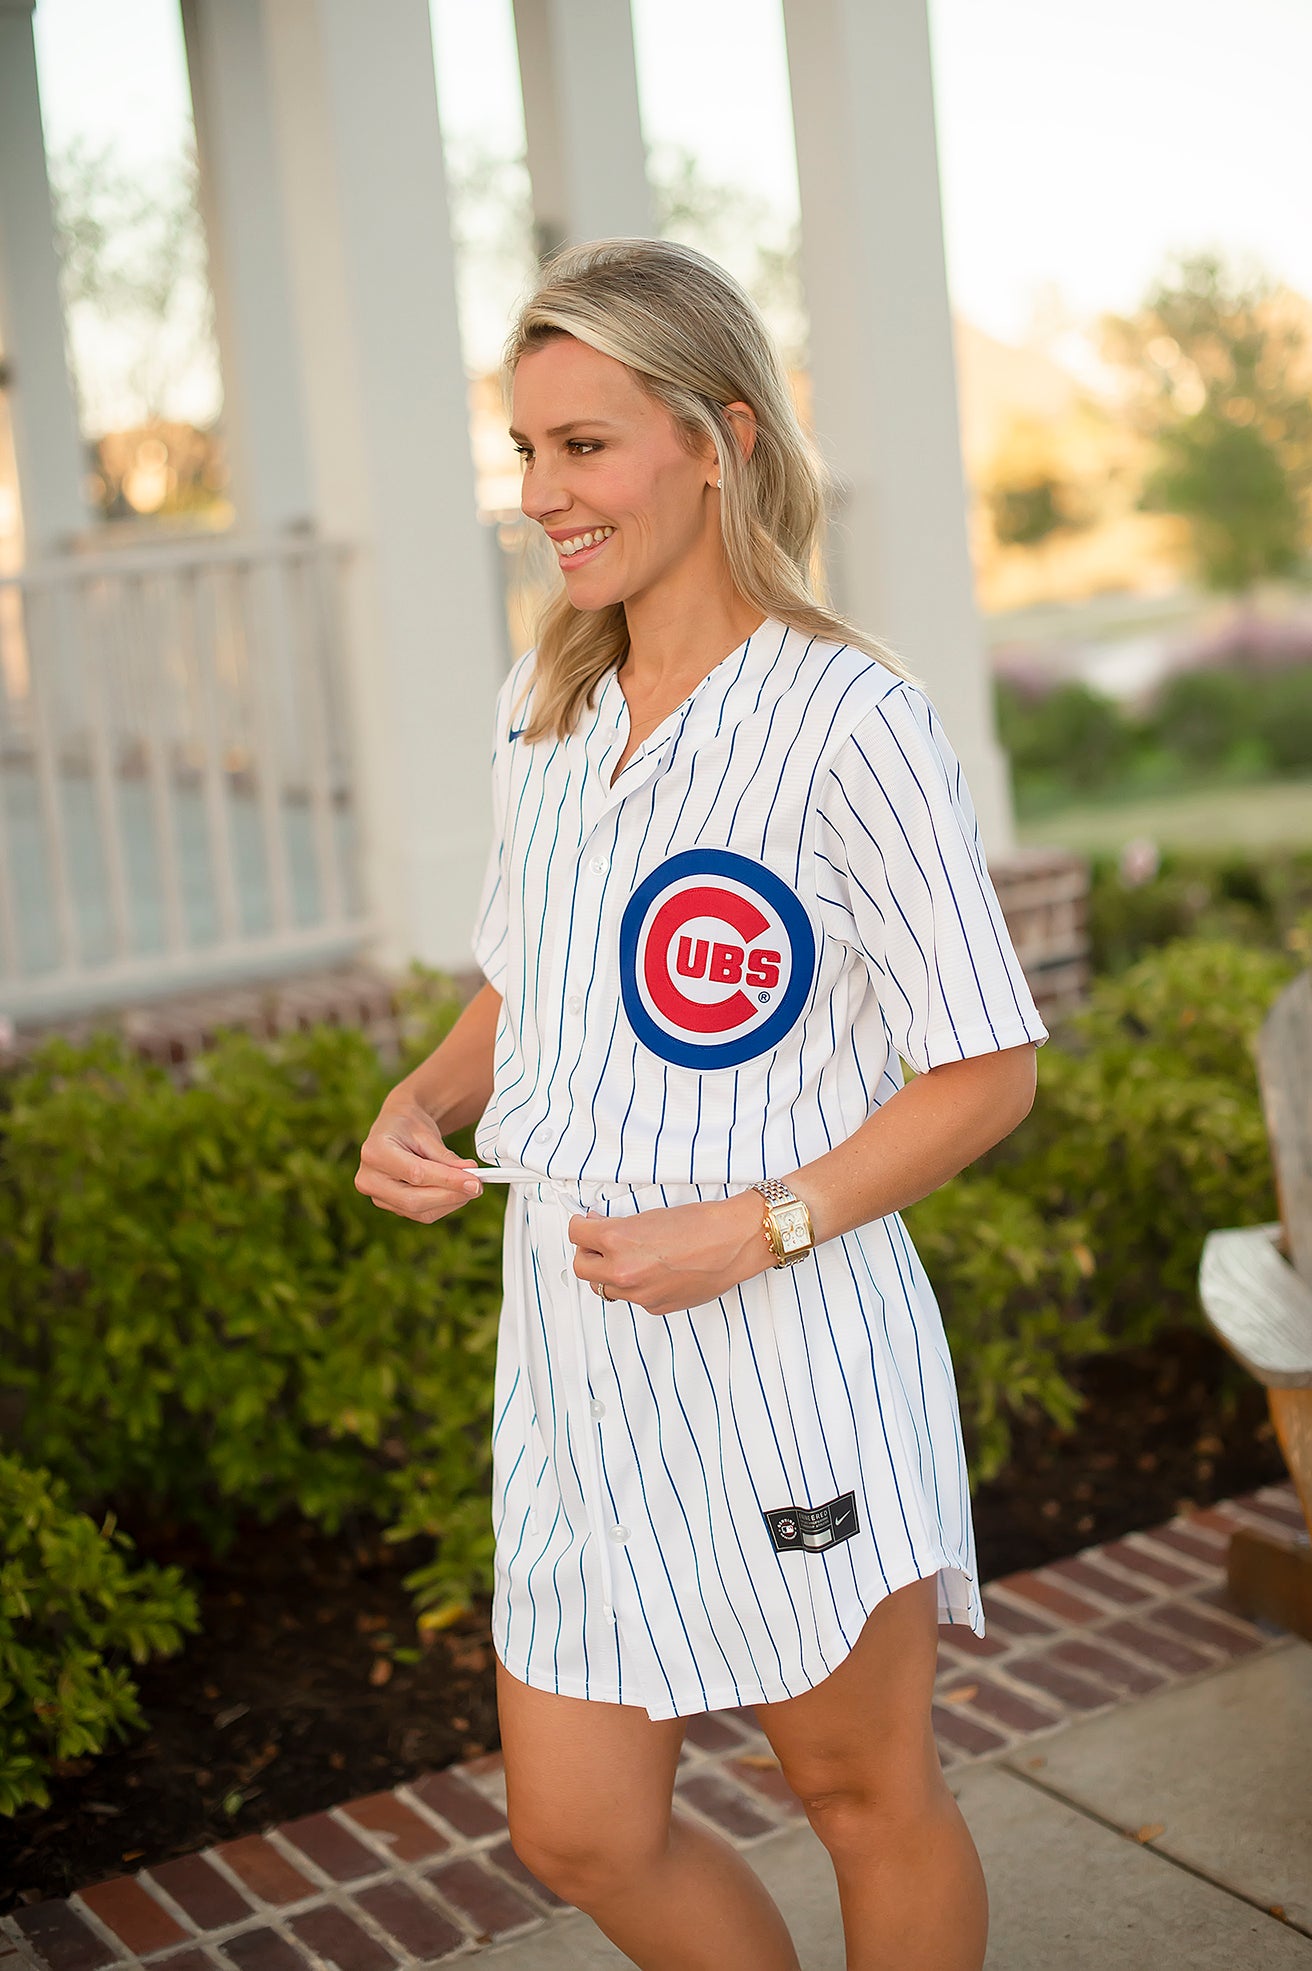 Women's Chicago Cubs Gear, Womens Cubs Apparel, Ladies Cubs Outfits